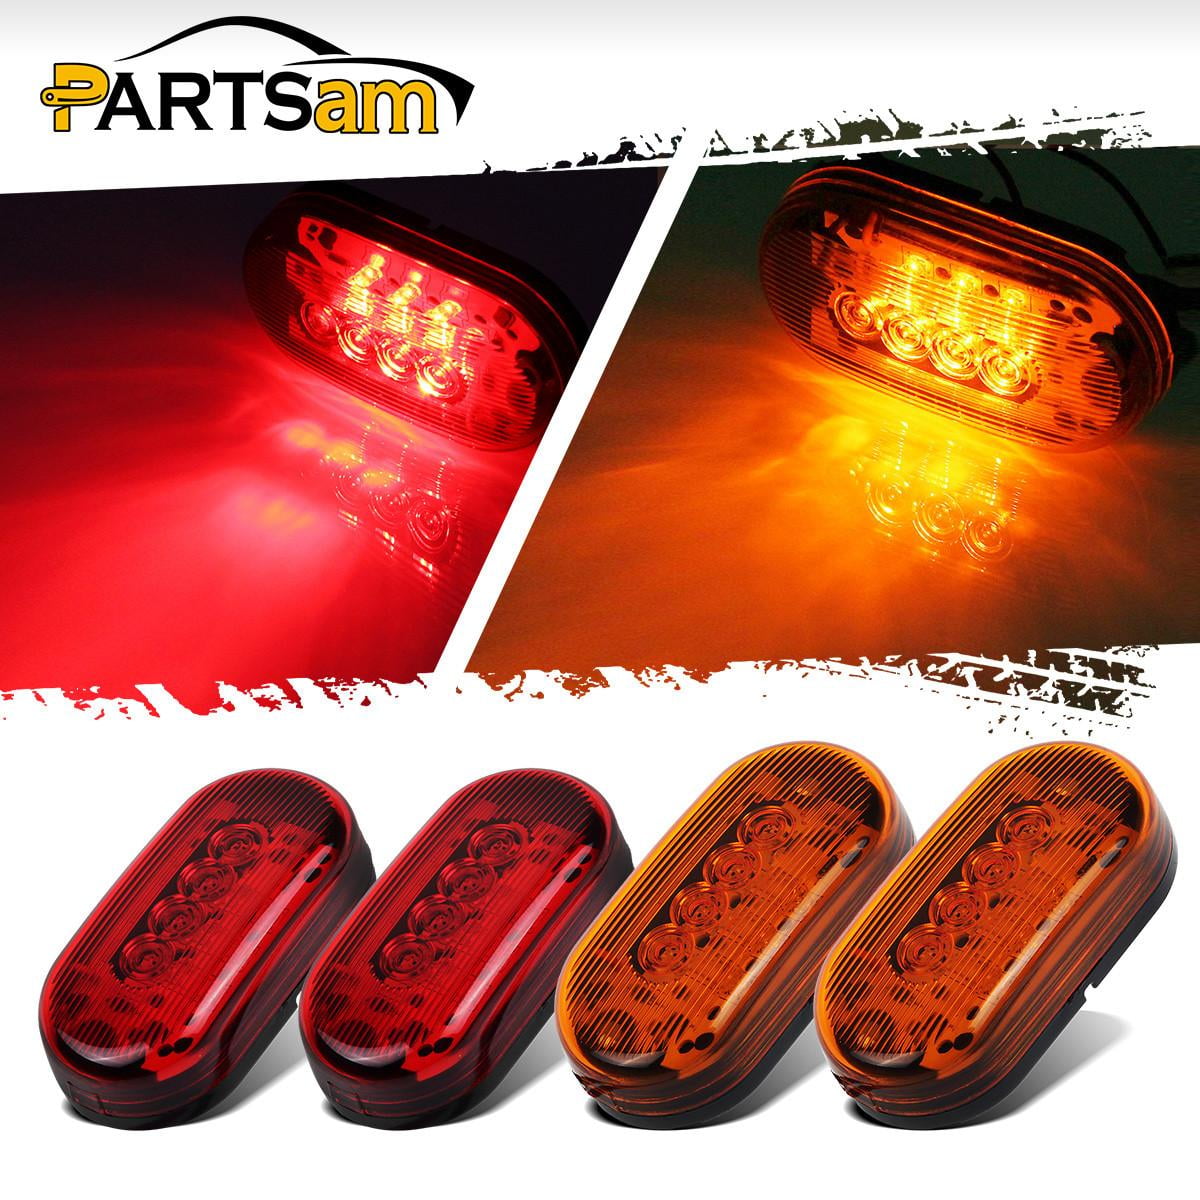 2 Red LED Clearance Marker Lamp Fender Lights Sealed Surface Mount for Trucks RV Cabin Lorry ATV Tractor Trailer Camper Universal Waterproof AA12 4 pcs TMHⓇ 2.5 Inch 12V DC Kit Smoked Lens 2 Amber 